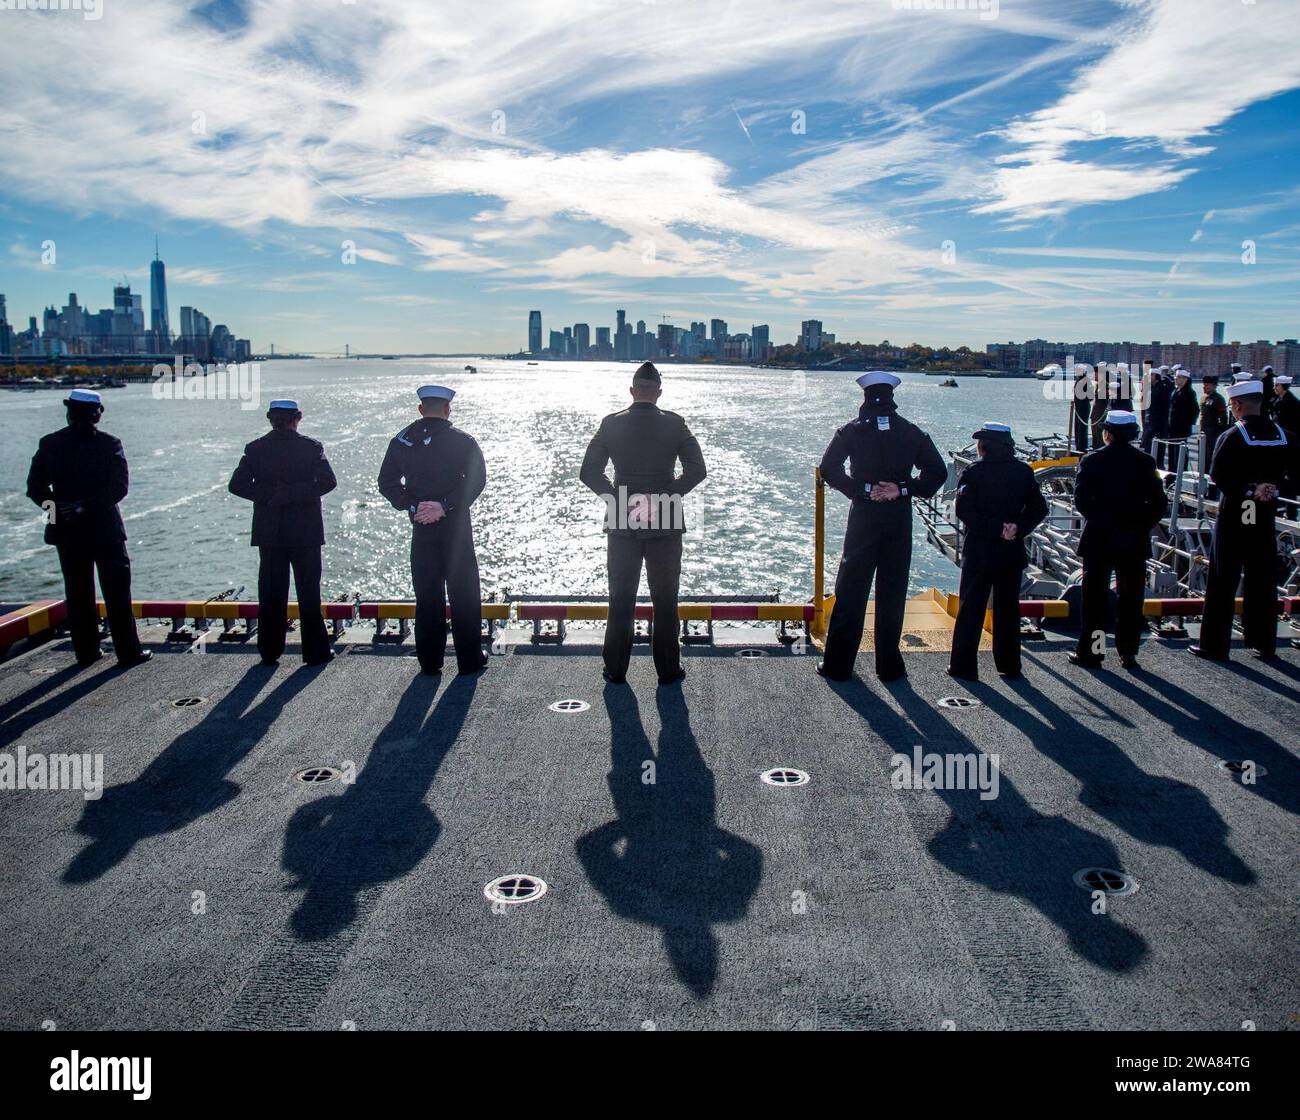 US military forces. 161110GD641-005 NEW YORK (Nov. 10, 2016) Marines and Sailors aboard the USS Iwo Jima (LHD-7) stand at parade rest while manning the rails as the ship docks at Port 88 in New York, Nov. 10, 2016. Marines with 1st Battalion, 8th Marine regiment, along with thousands of service members cross the armed forces are participating in Veterans Week New York City 2016 to honor the service of all the nation’s veterans. (U.S. Marine Corps photo by Sgt. Anthony Mesa/Released)) Stock Photo